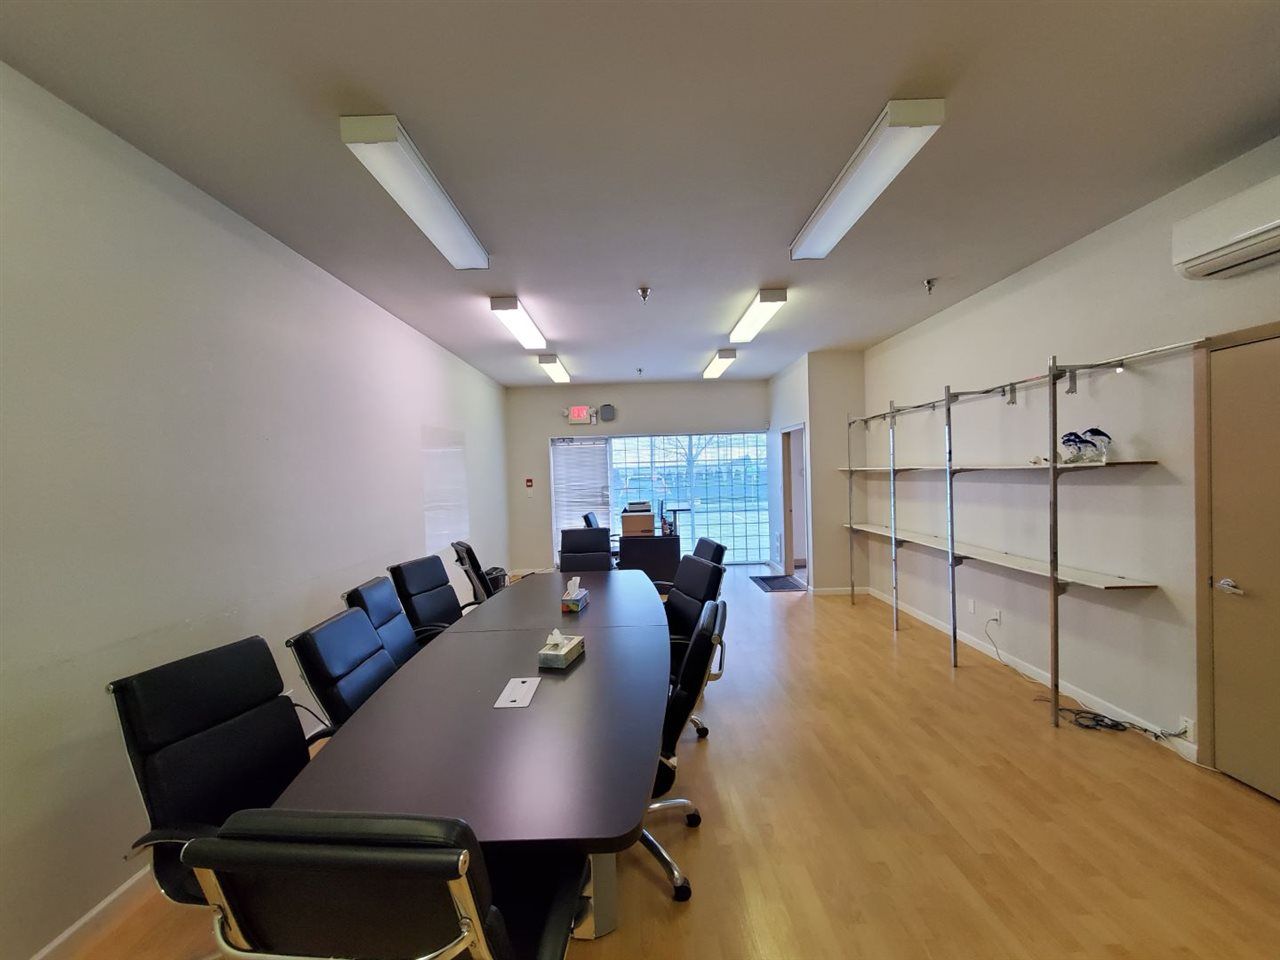 Main Photo: 125 13988 MAYCREST WAY in Richmond: East Cambie Industrial for lease : MLS®# C8029762